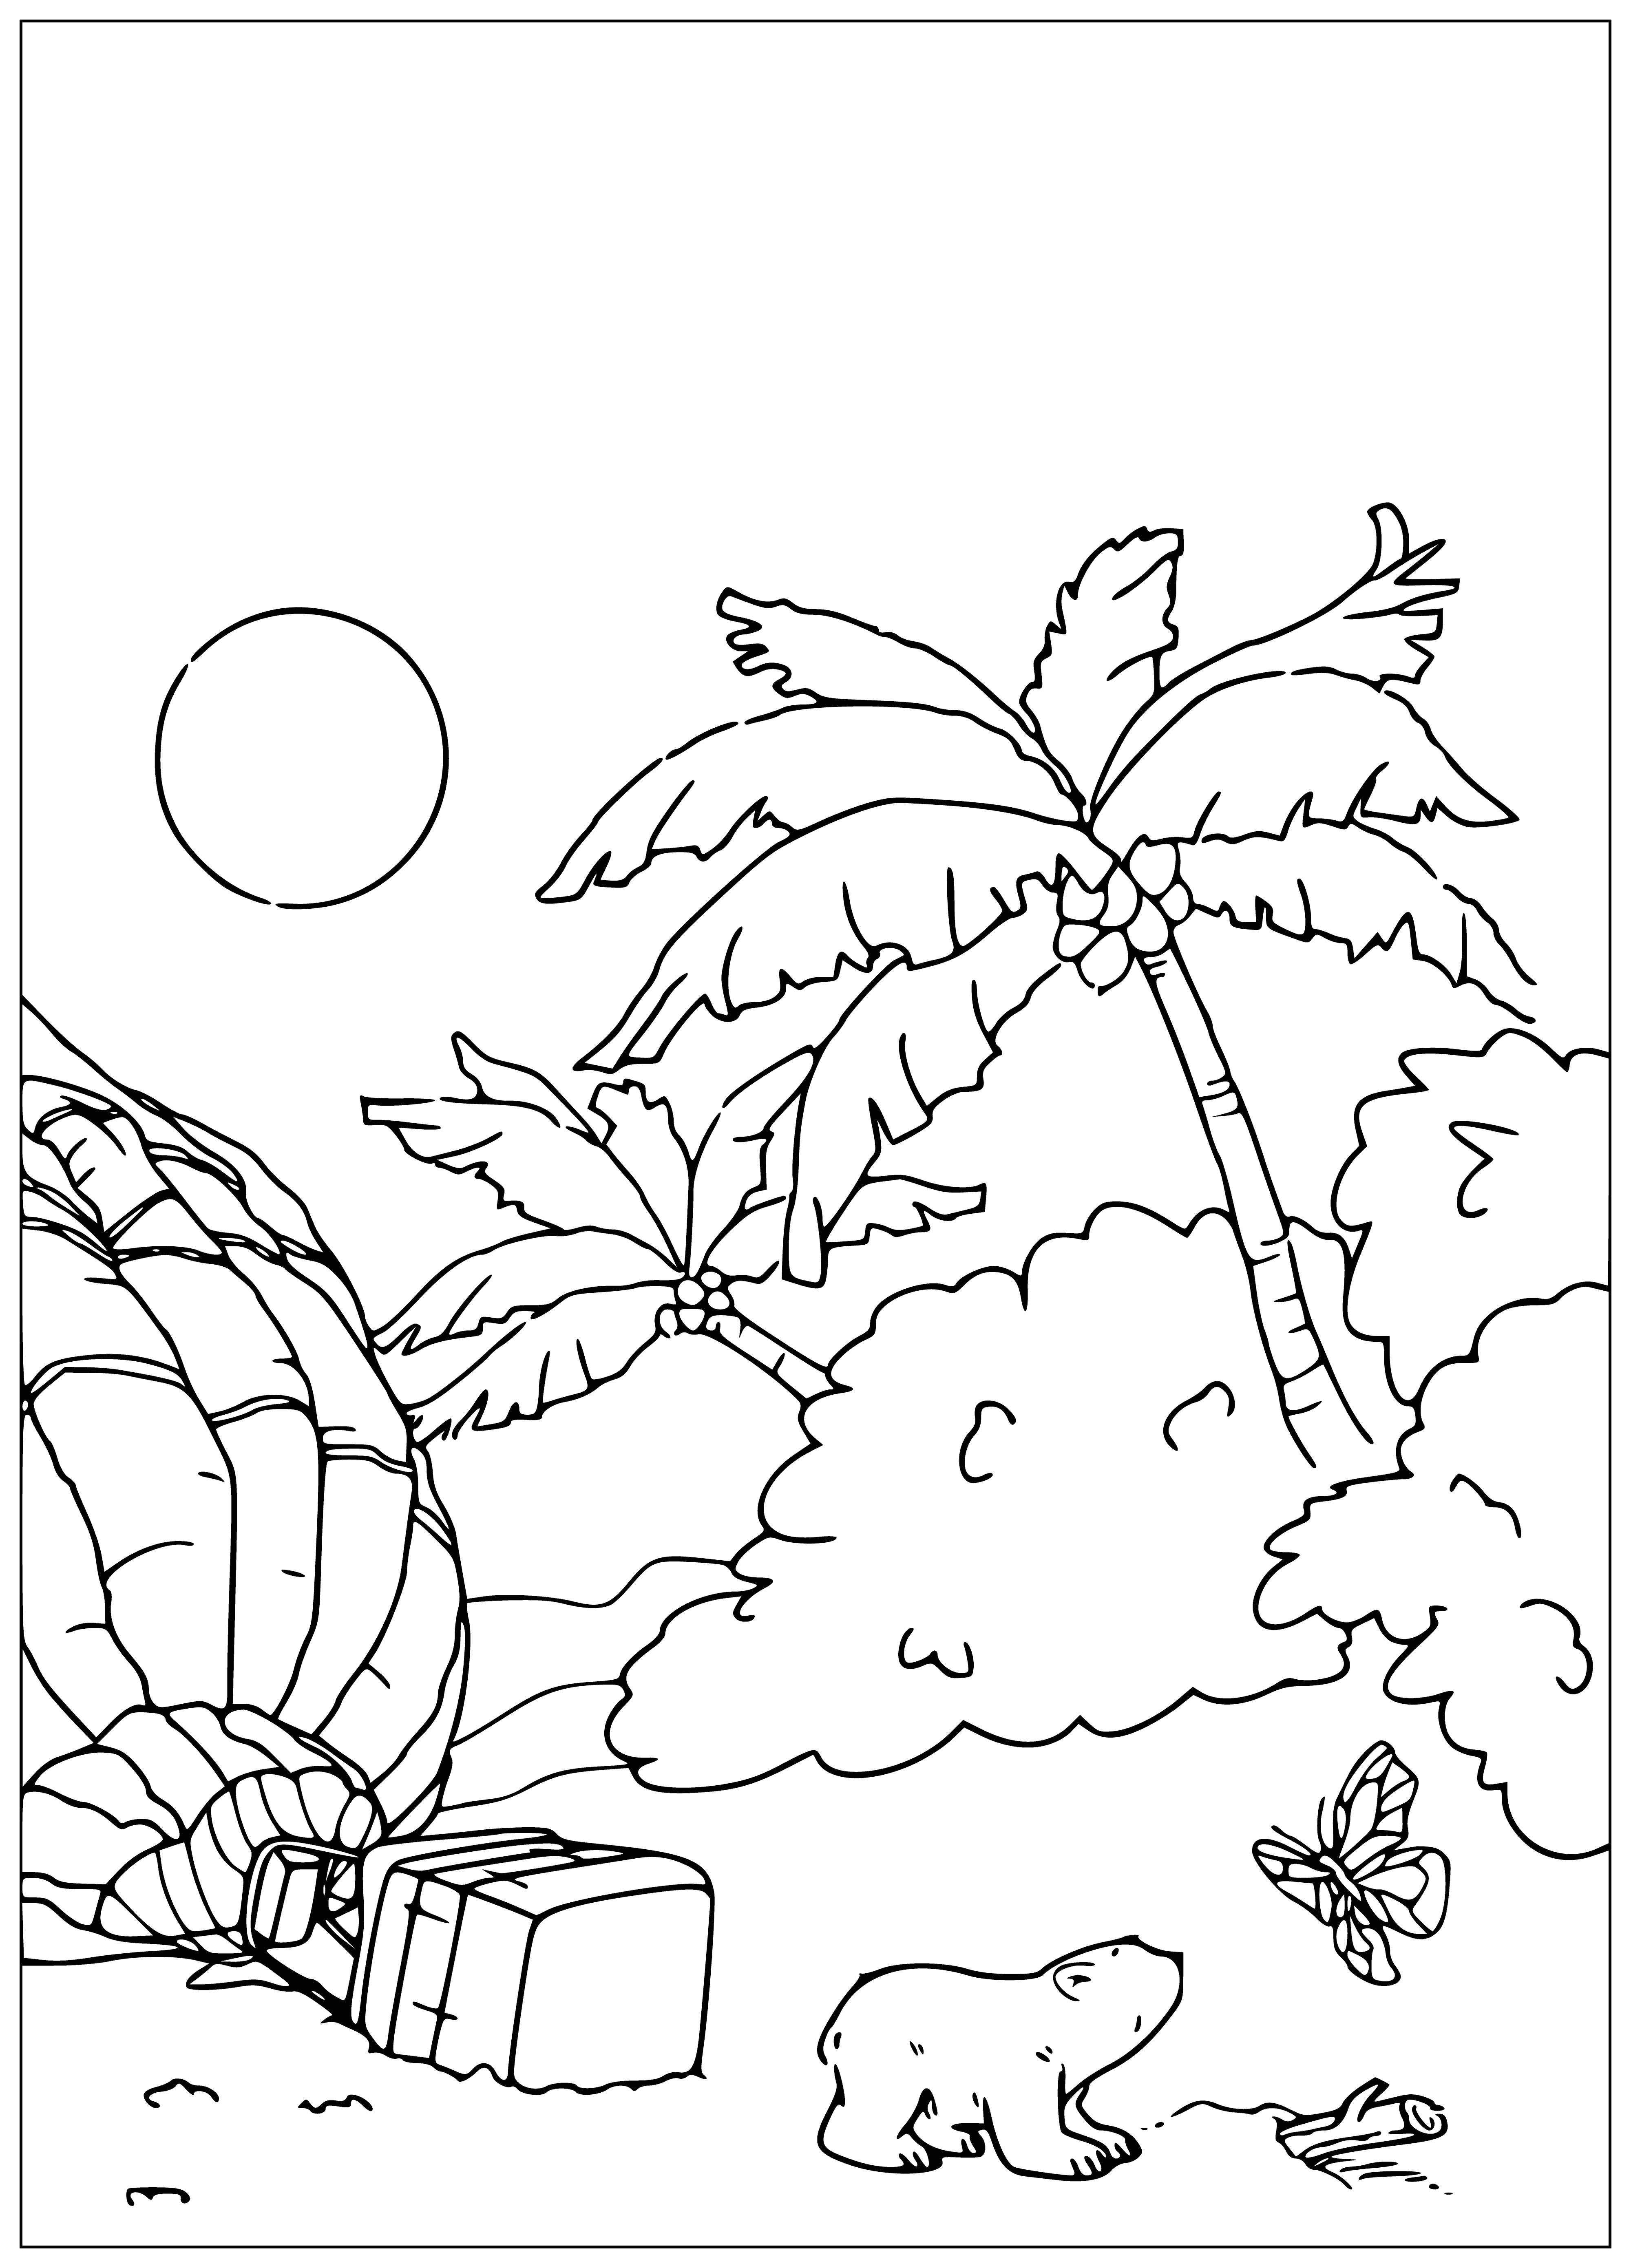 Lars has landed coloring page